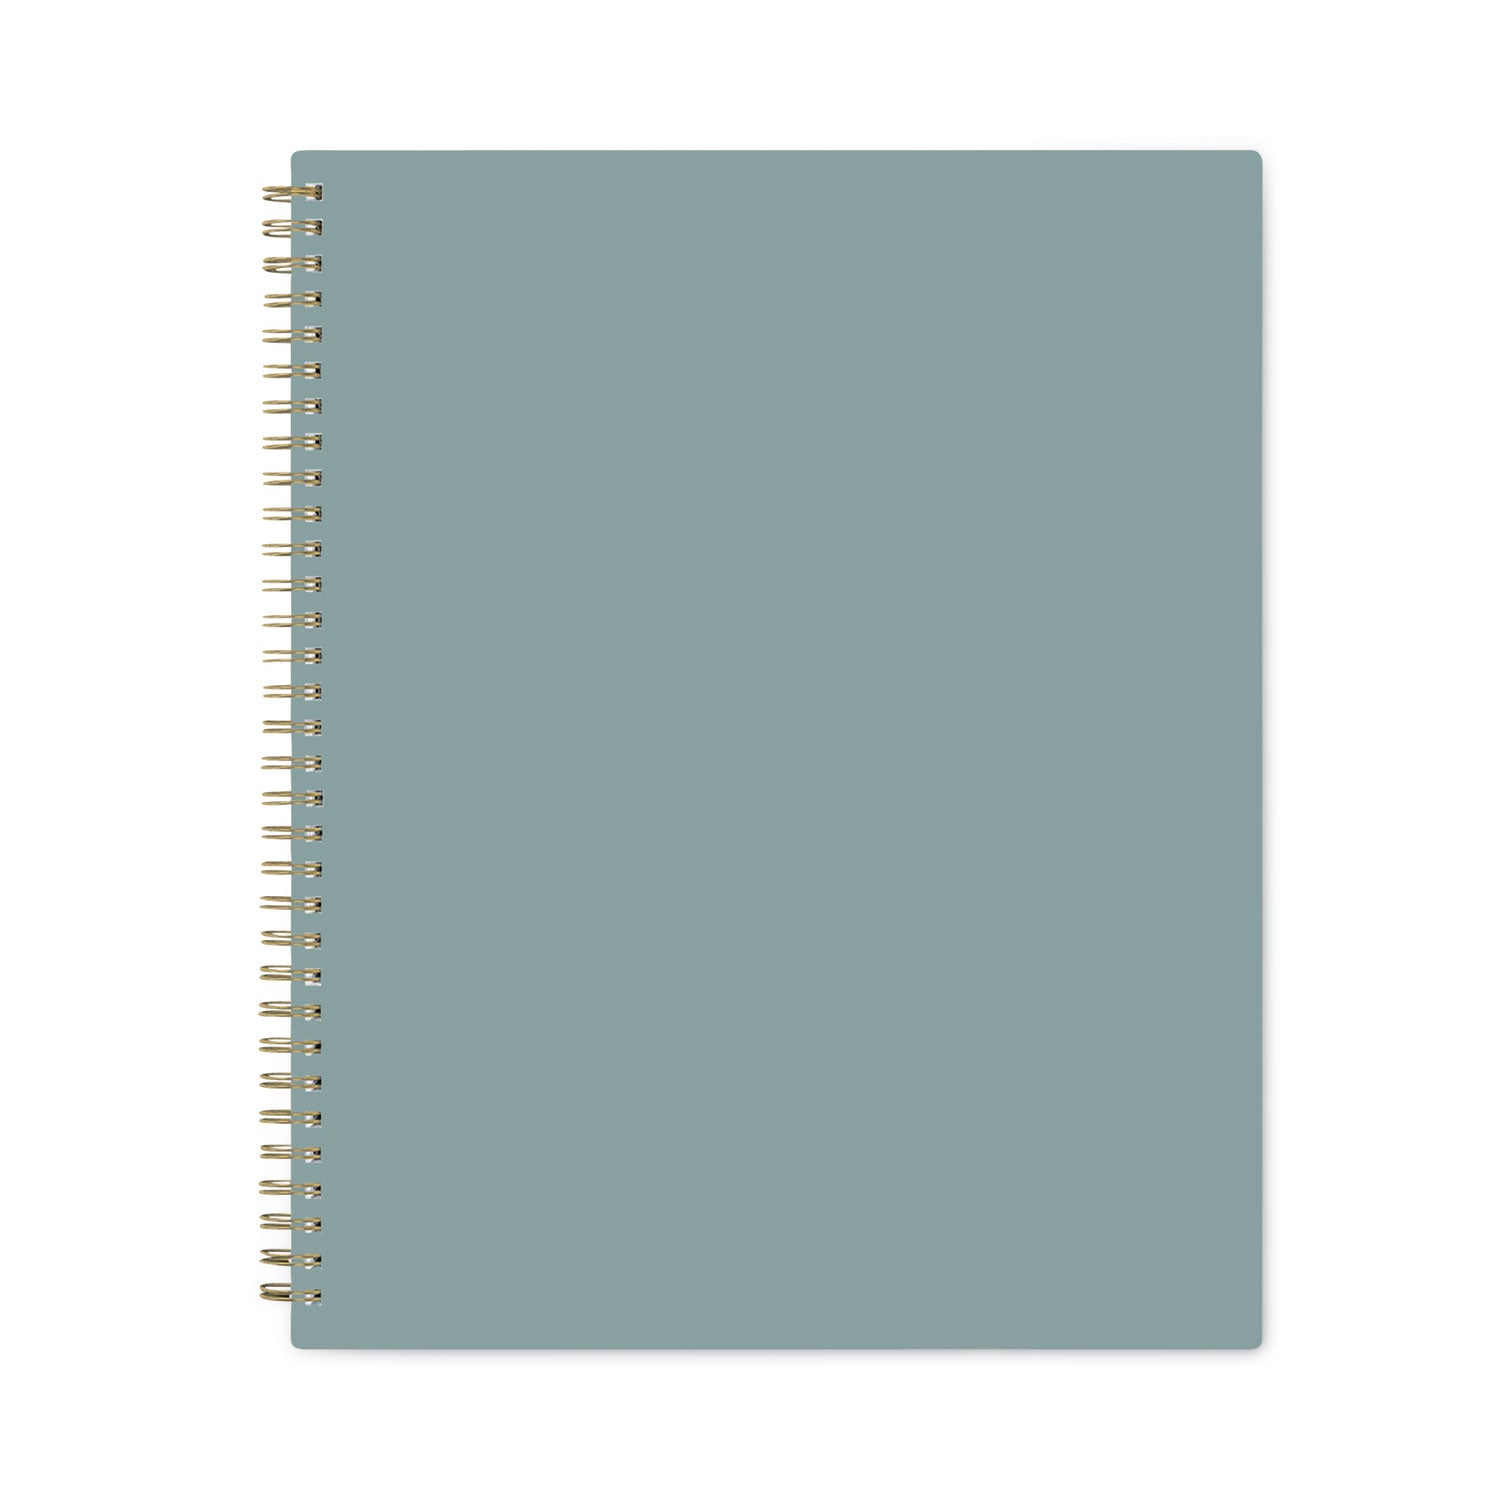 greta-academic-year-weekly-monthly-planner-greta-floral-artwork-115-x-8-green-cover-12-month-july-june-2022-2023_bls136479 - 3